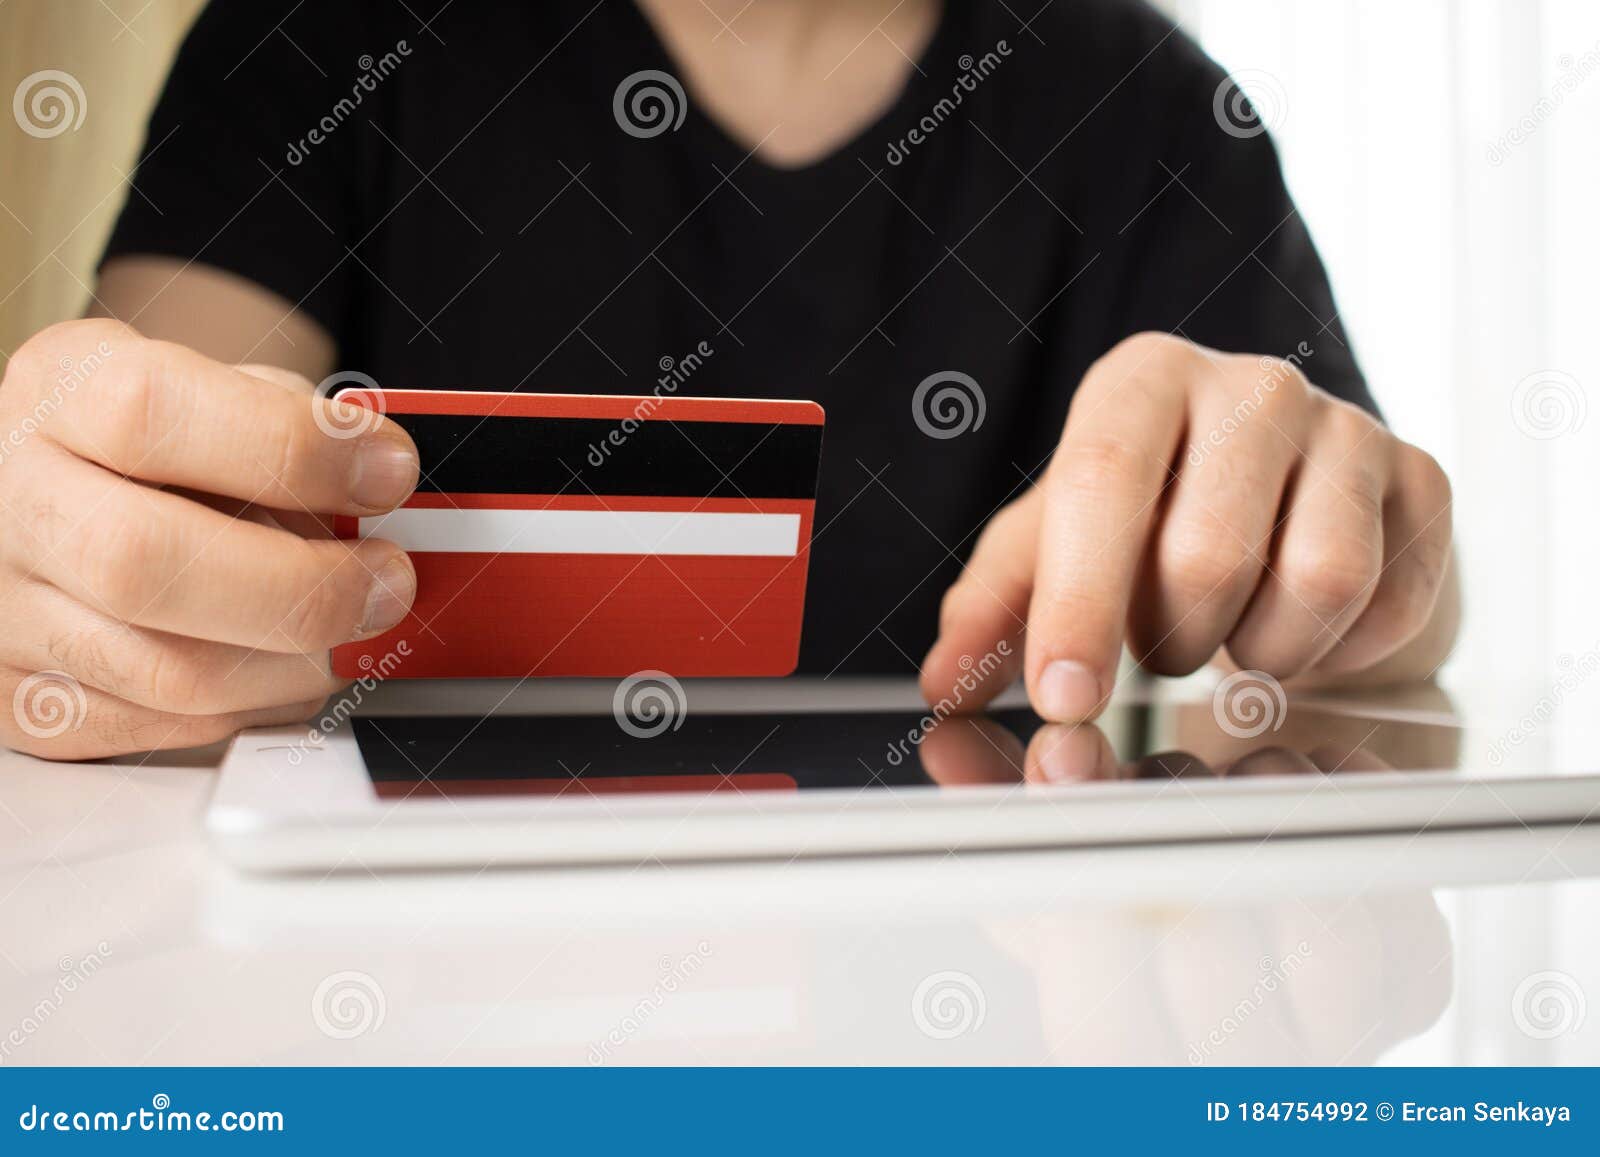 man holding tablet pc and credit card indoor, shopping online